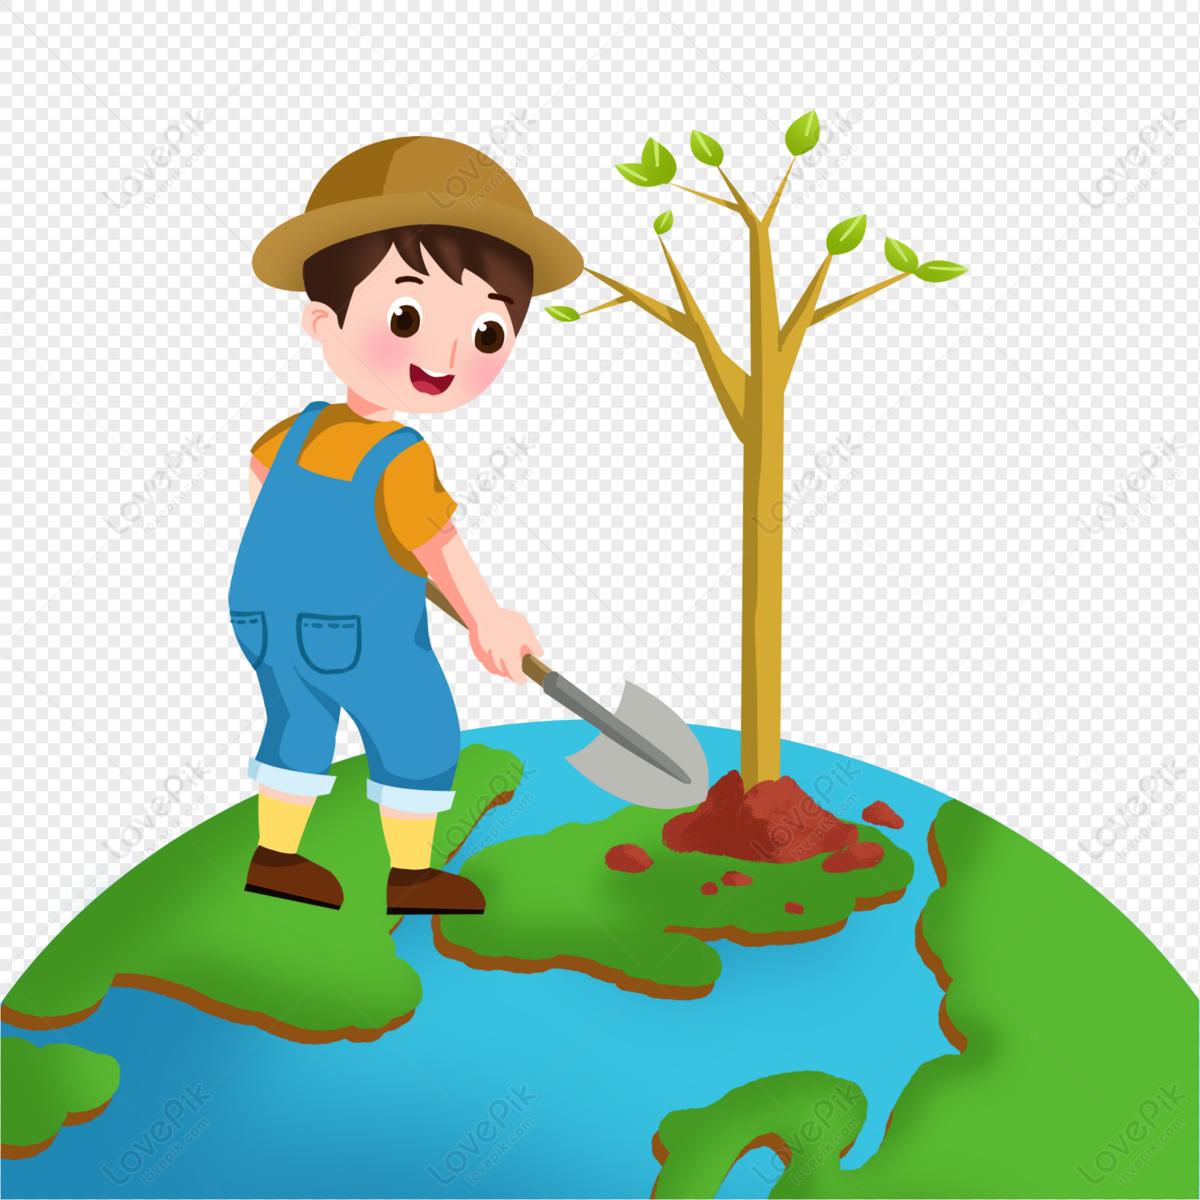 Cartoons Of Planting Trees Images HD Pictures For Free Vectors